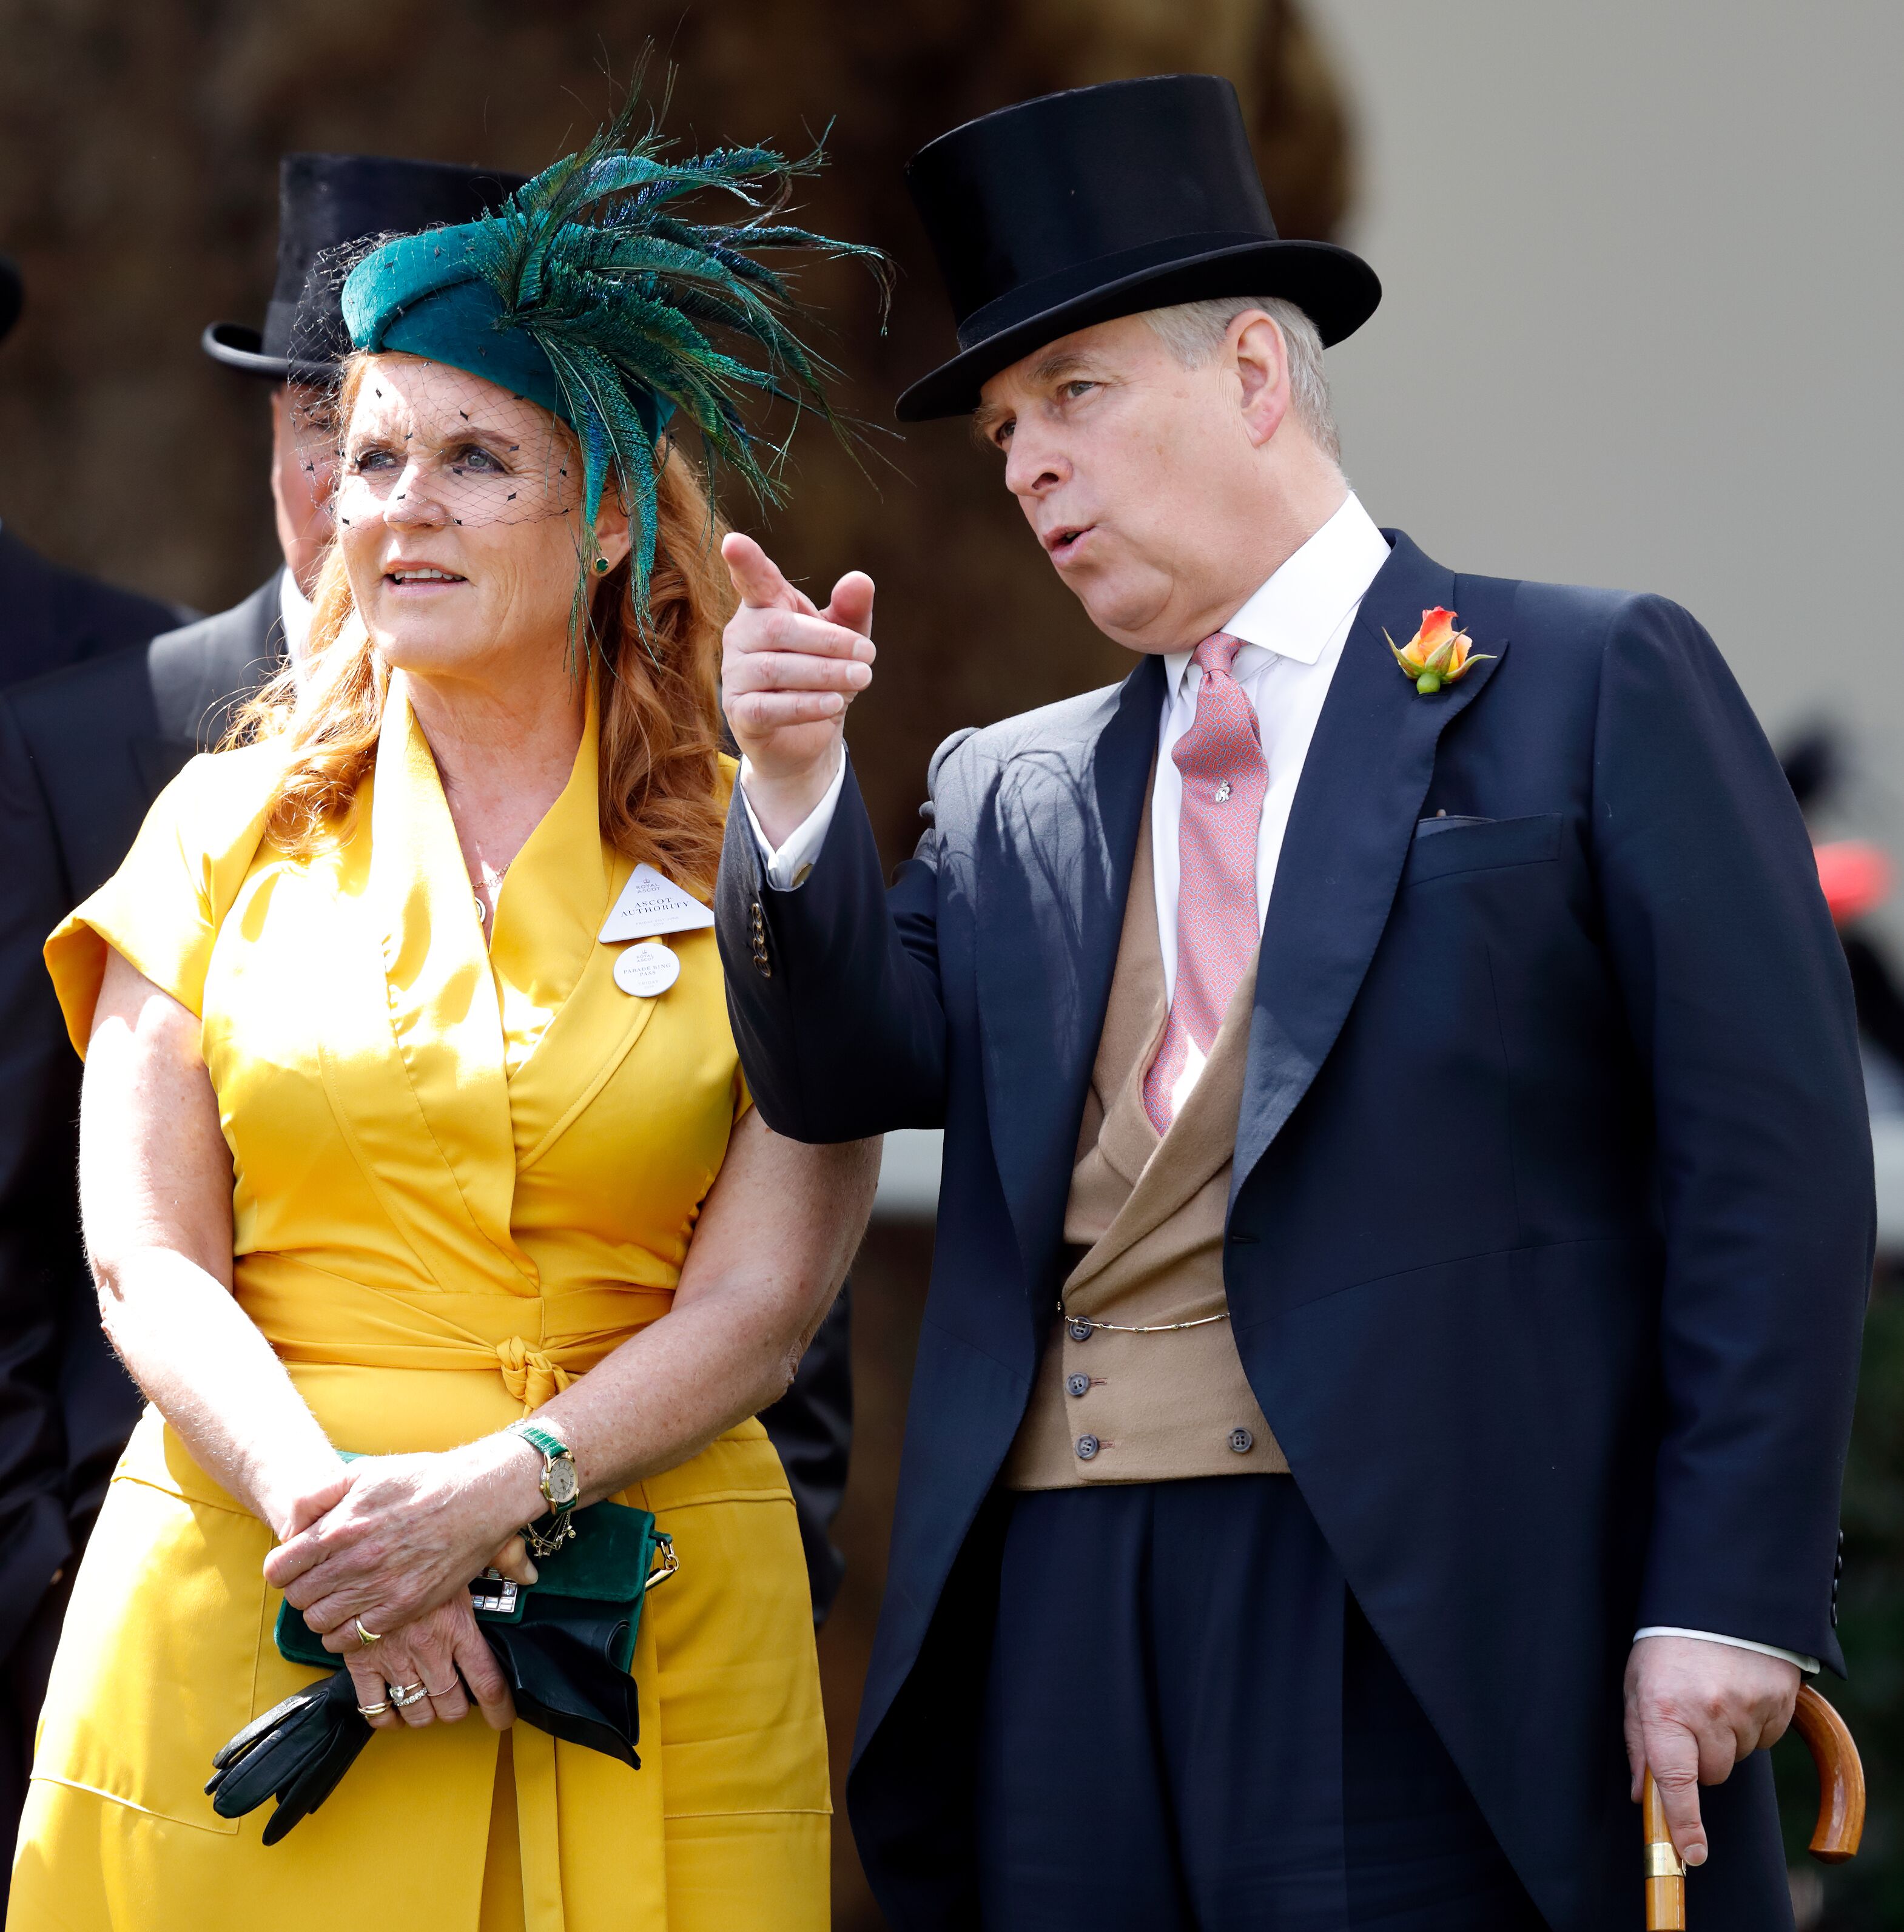 Sarah Ferguson, Duchess of York and Prince Andrew, Duke of York attend day four of Royal Ascot at Ascot Racecourse on June 21, 2019 in Ascot, England | Photo: Getty Images